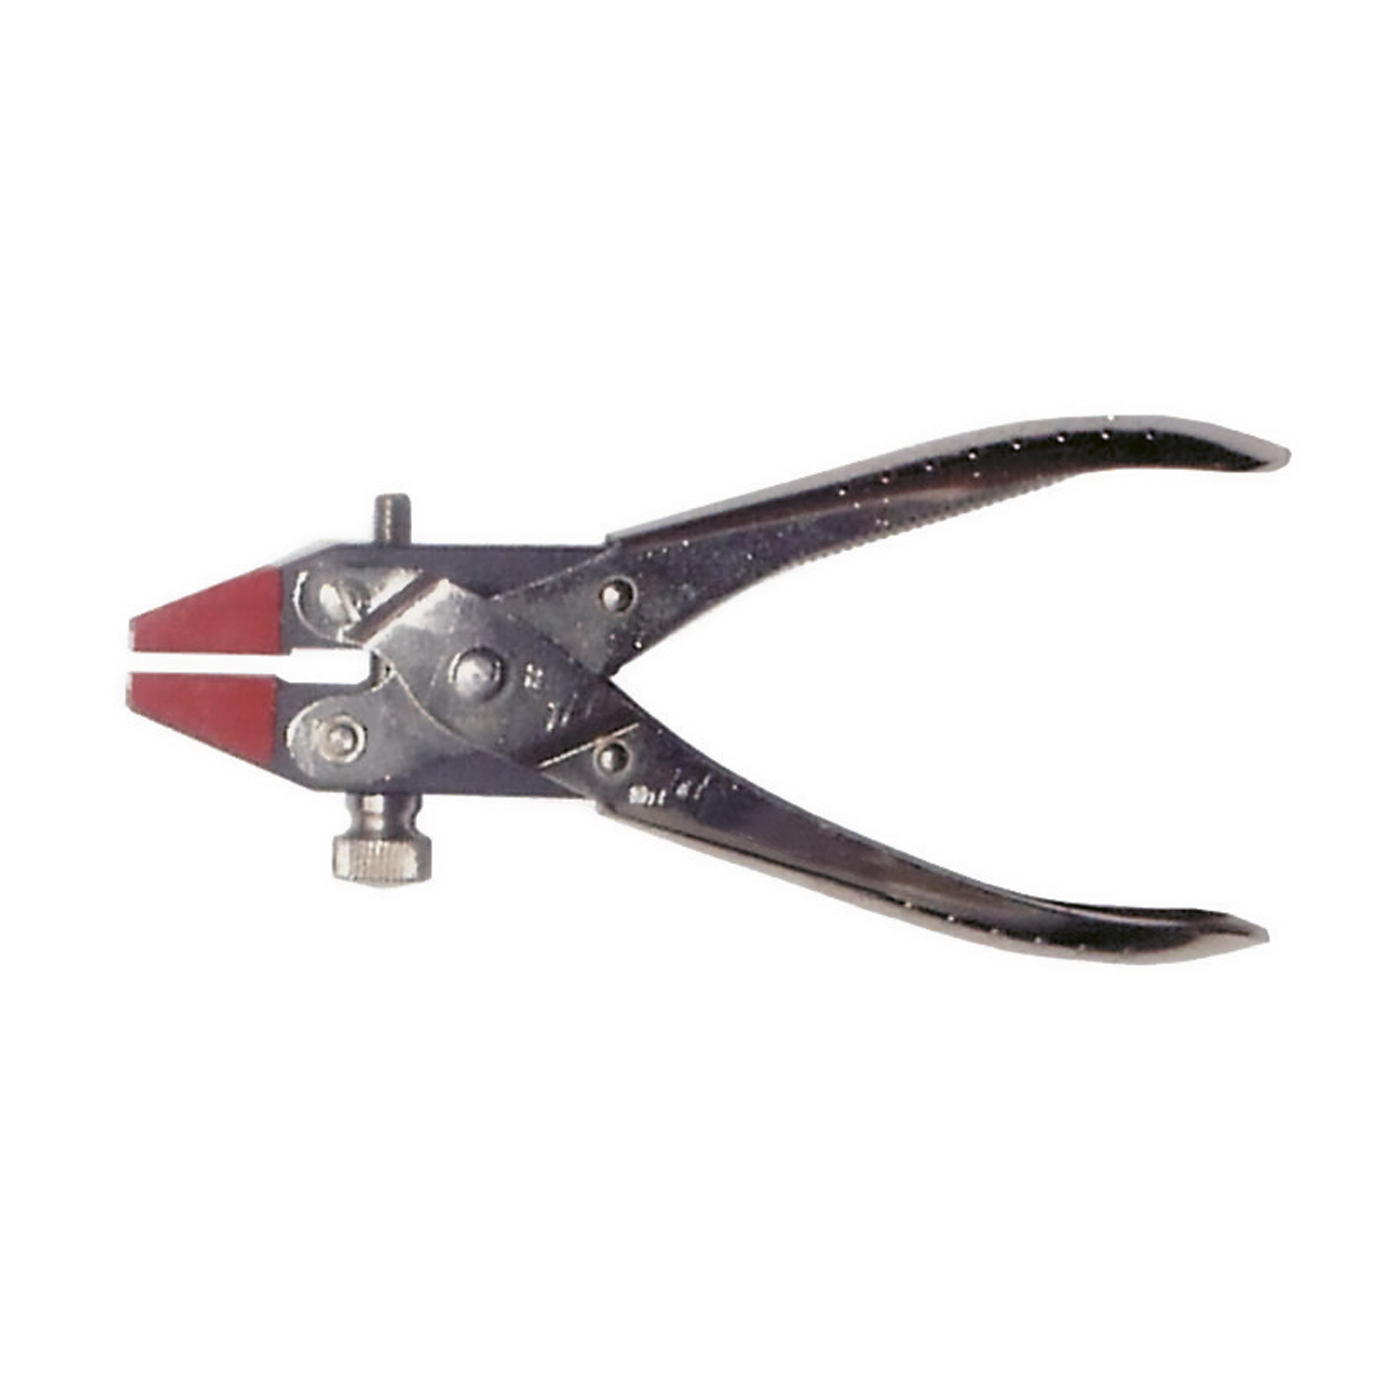 Parallel Holding Pliers, 160 mm - 1 piece